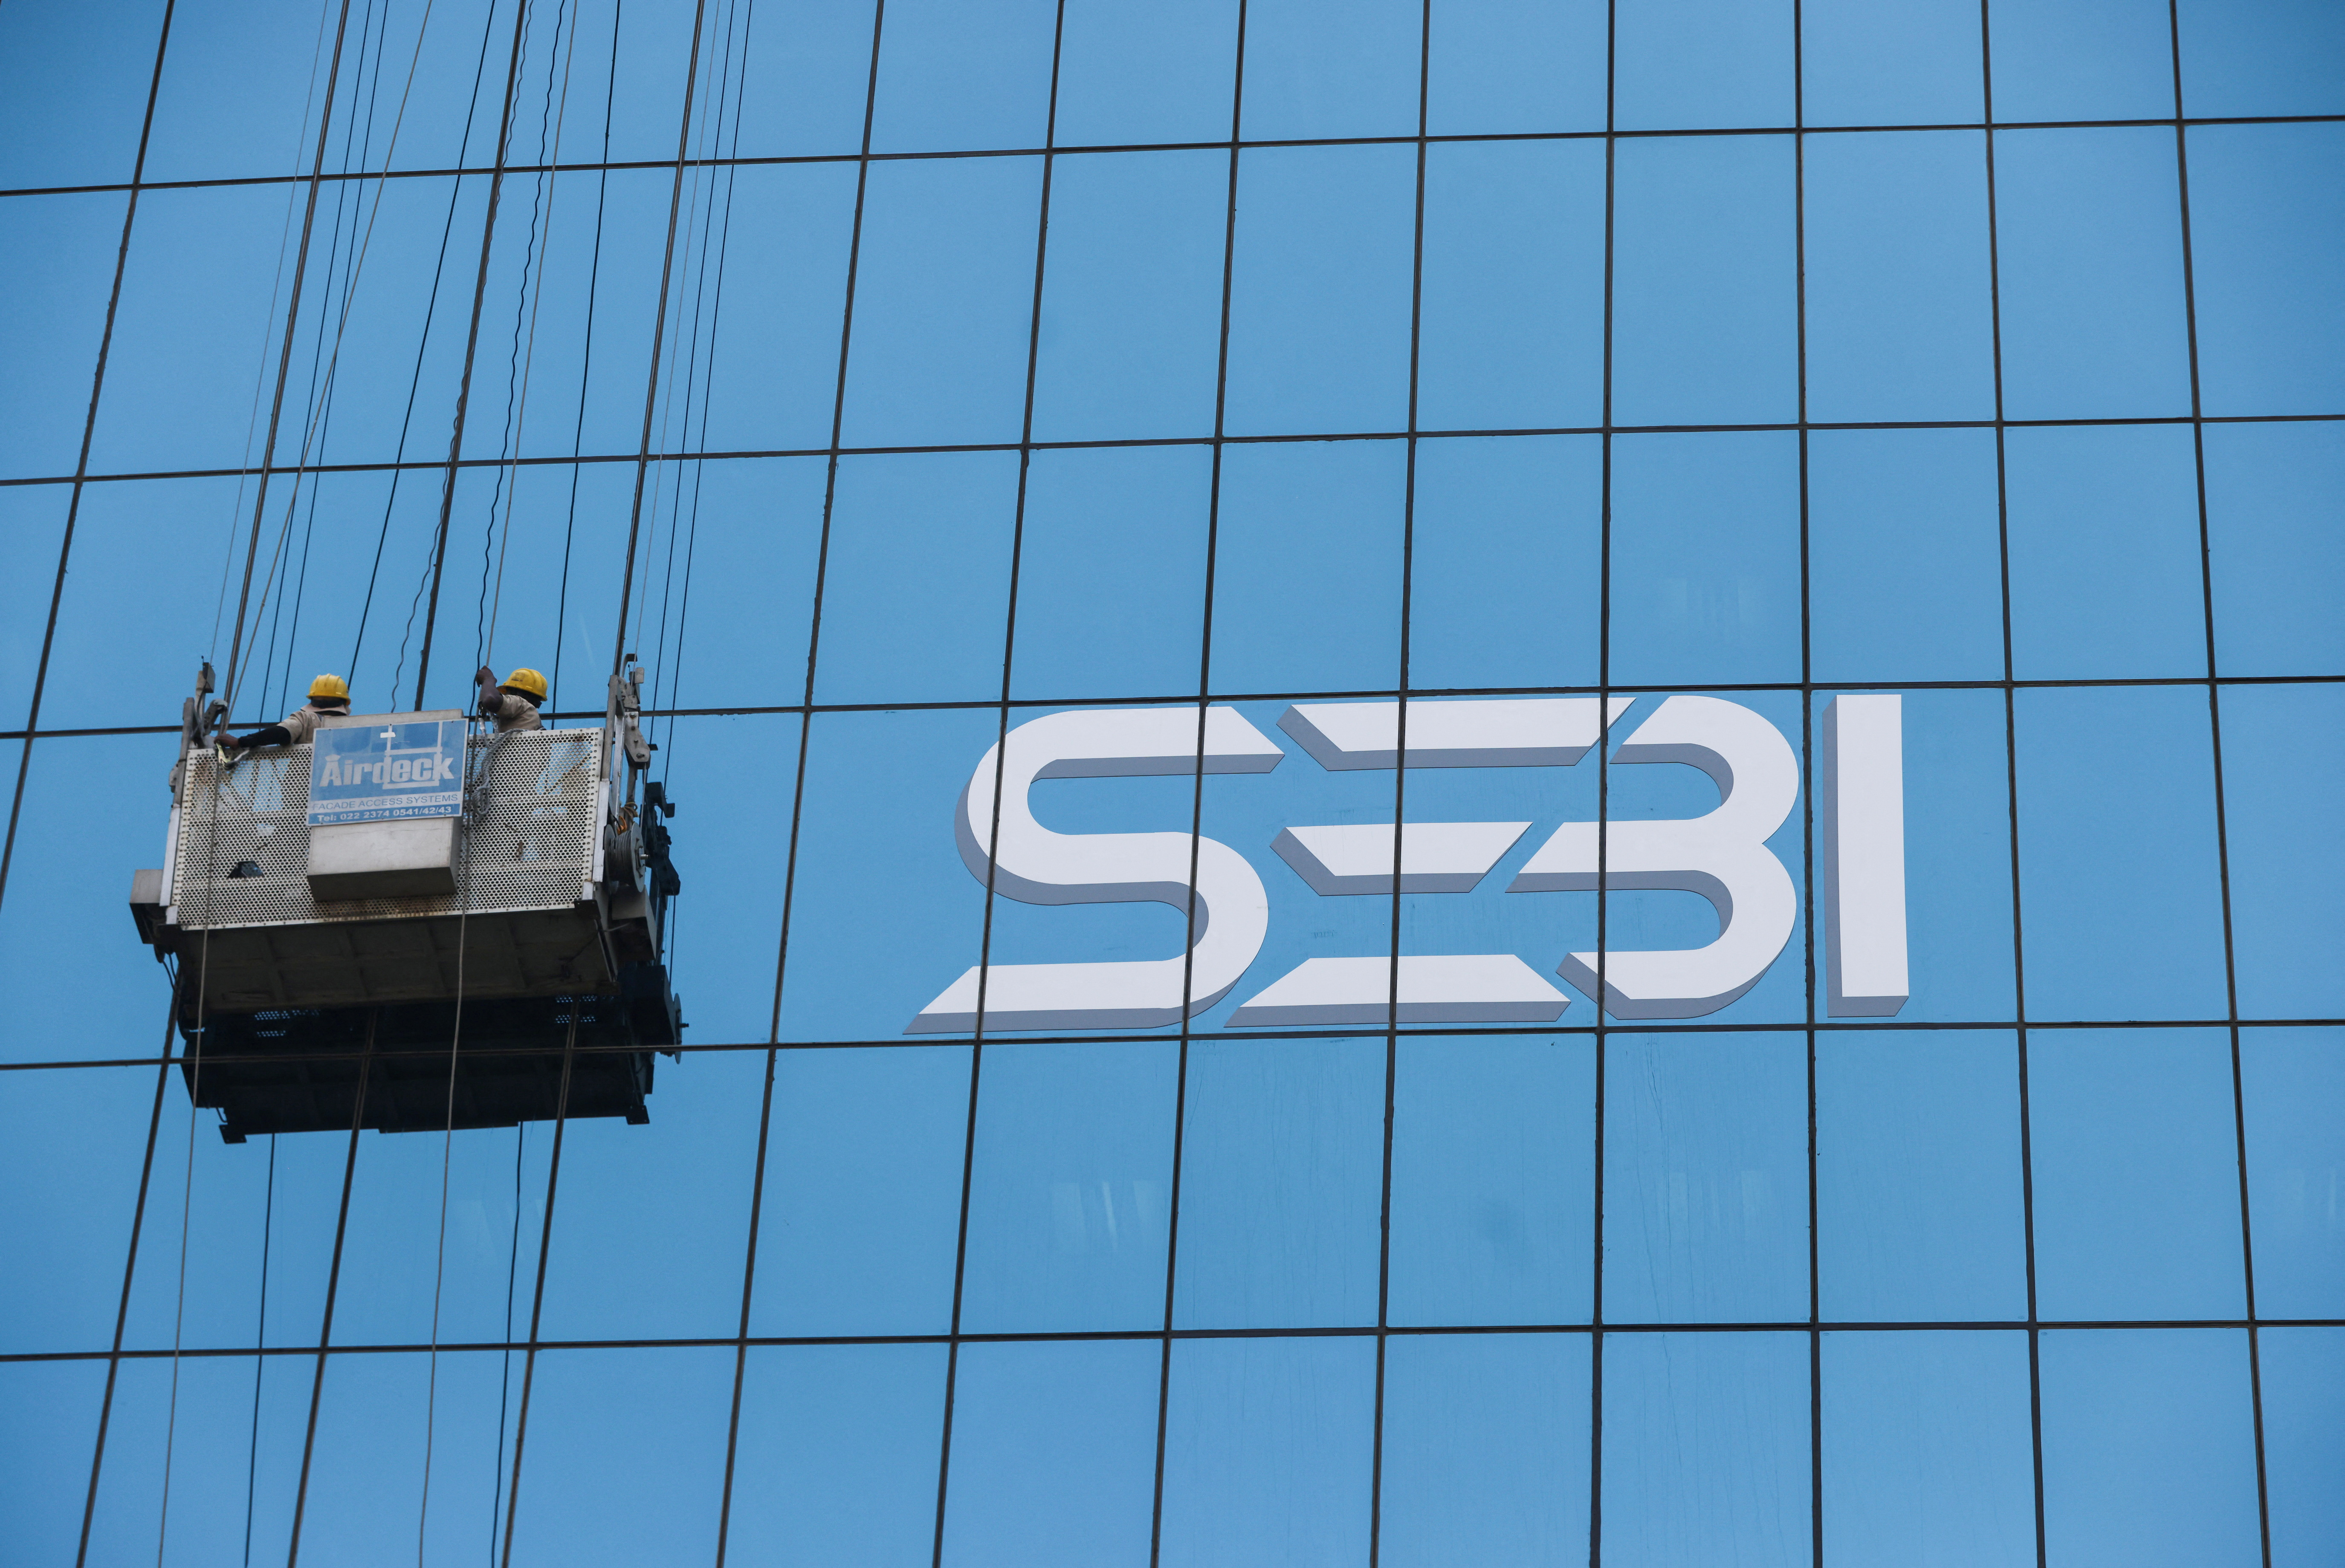 Window cleaners work next to the new logo of the Securities and Exchange Board of India (SEBI) at its headquarters in Mumbai